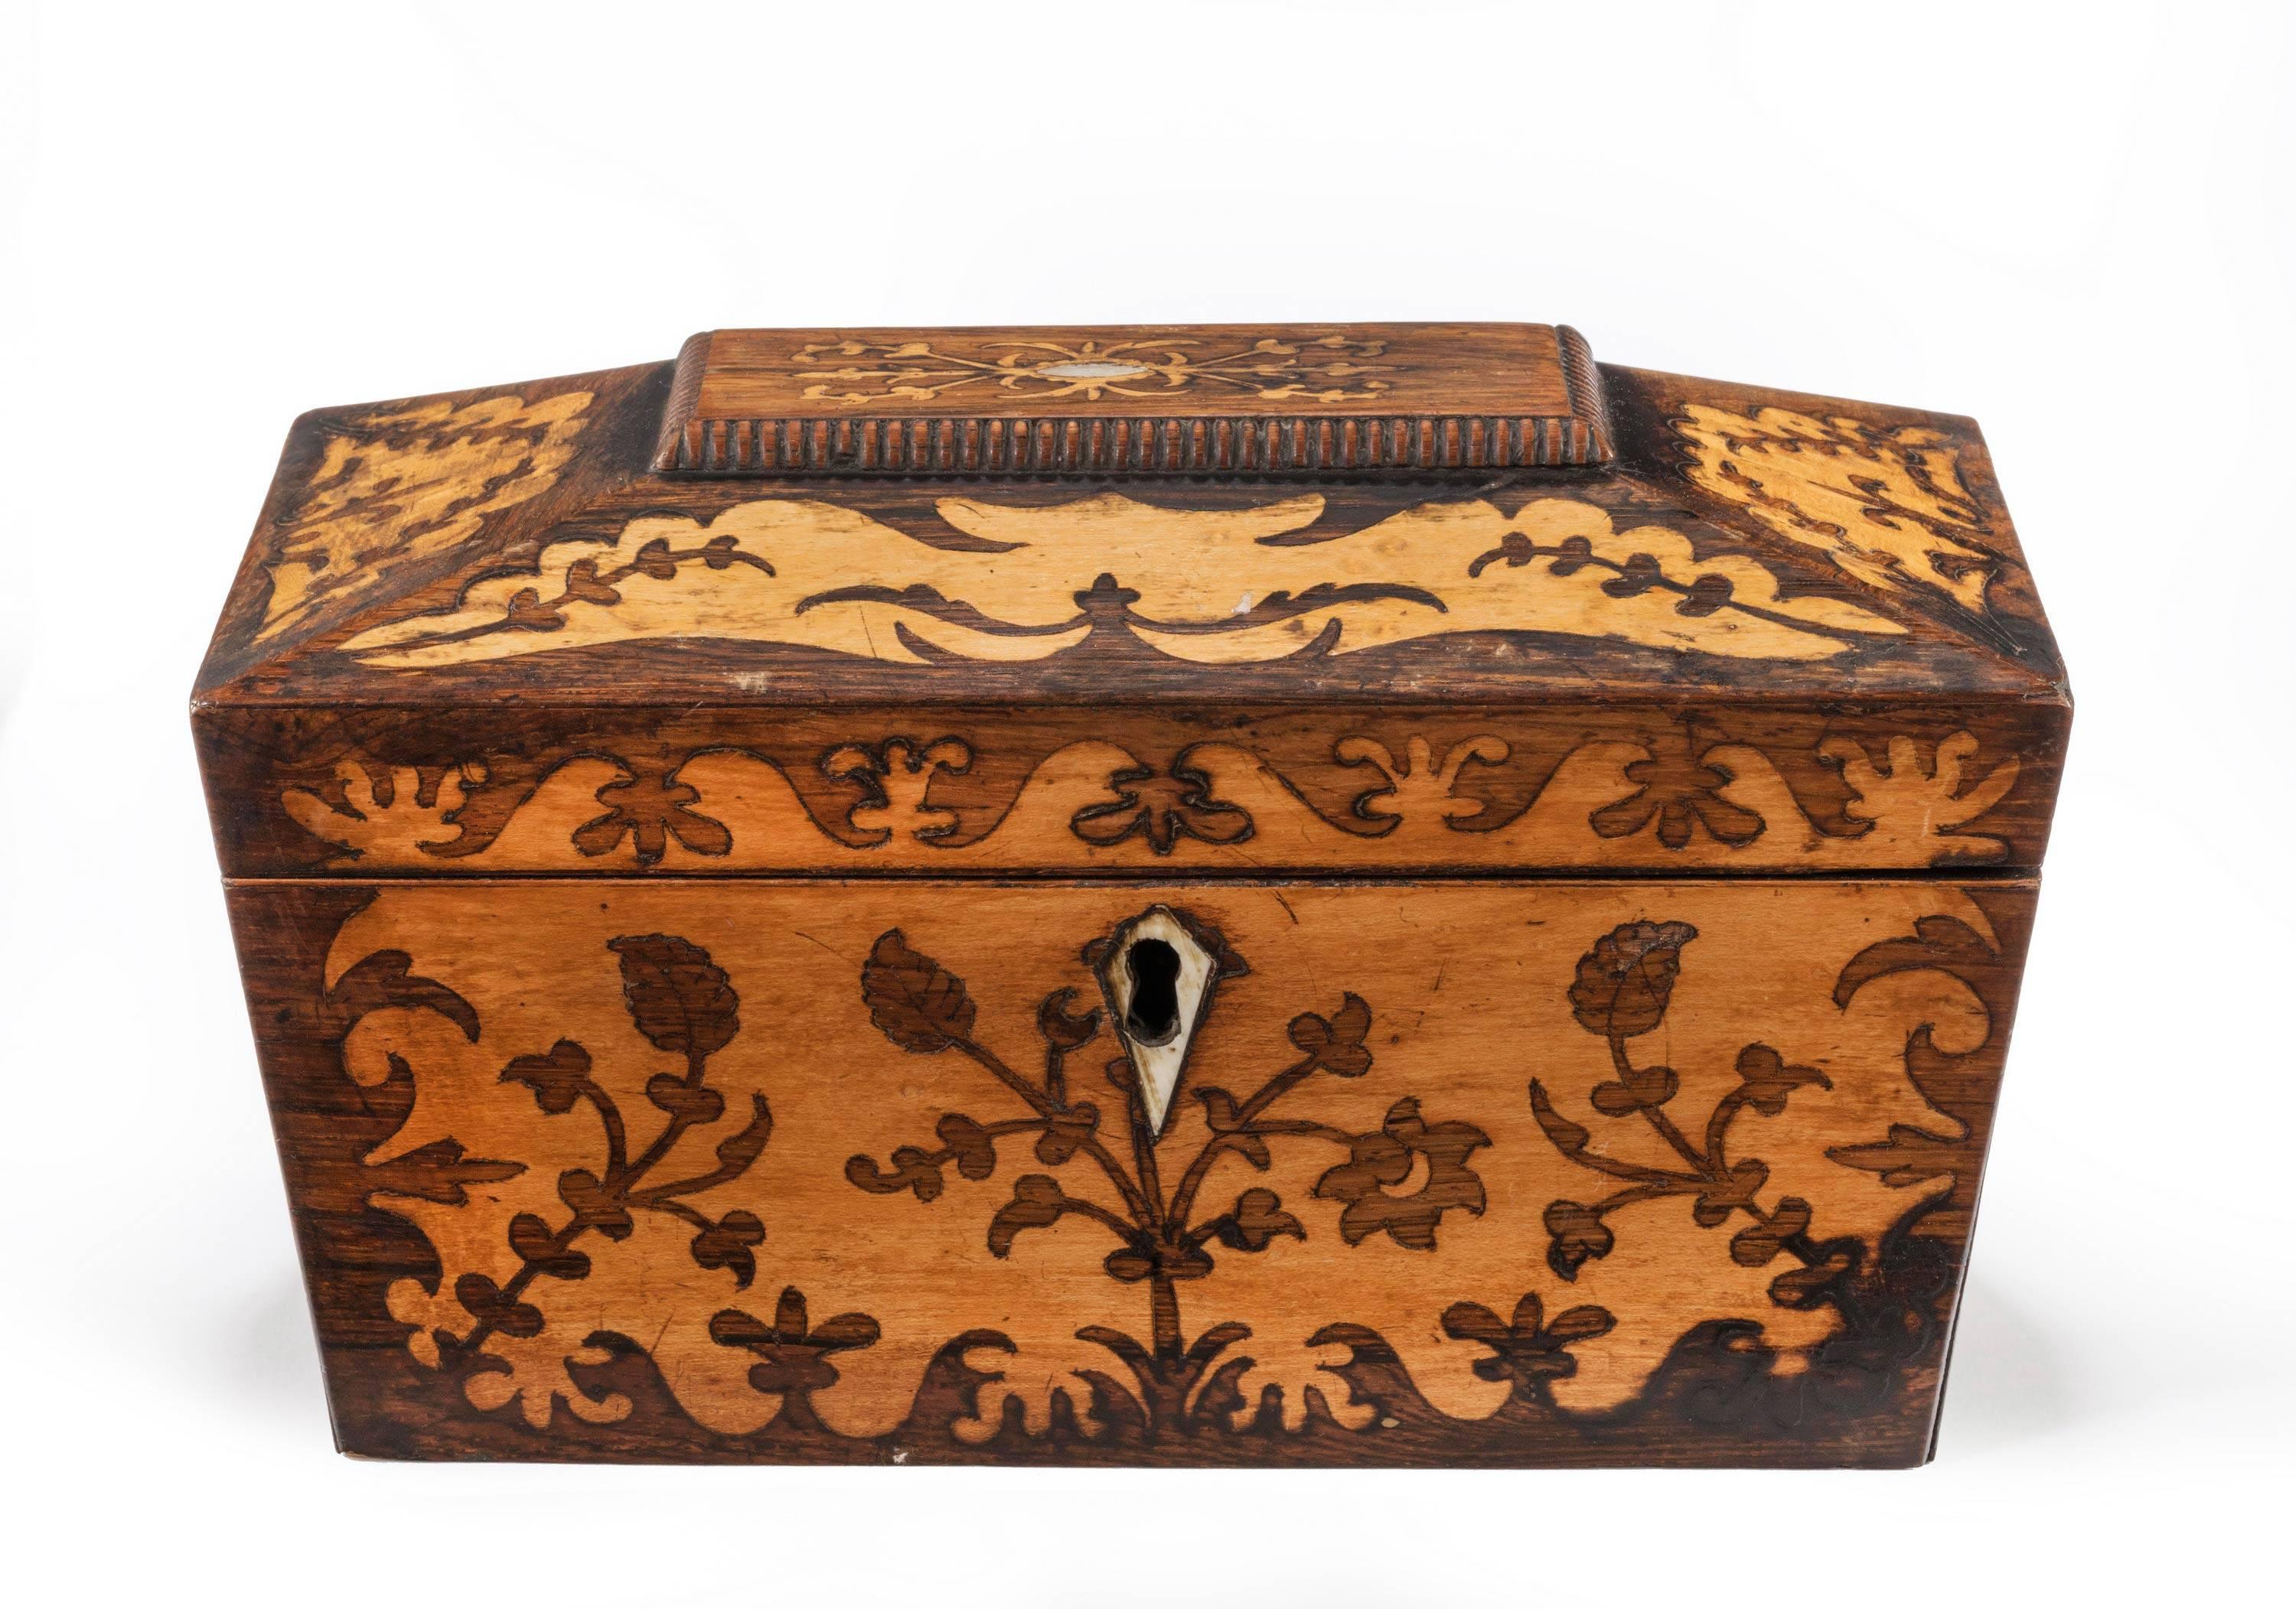 Regency Period Satinwood Marquetry Inlaid Caddy In Excellent Condition In Peterborough, Northamptonshire